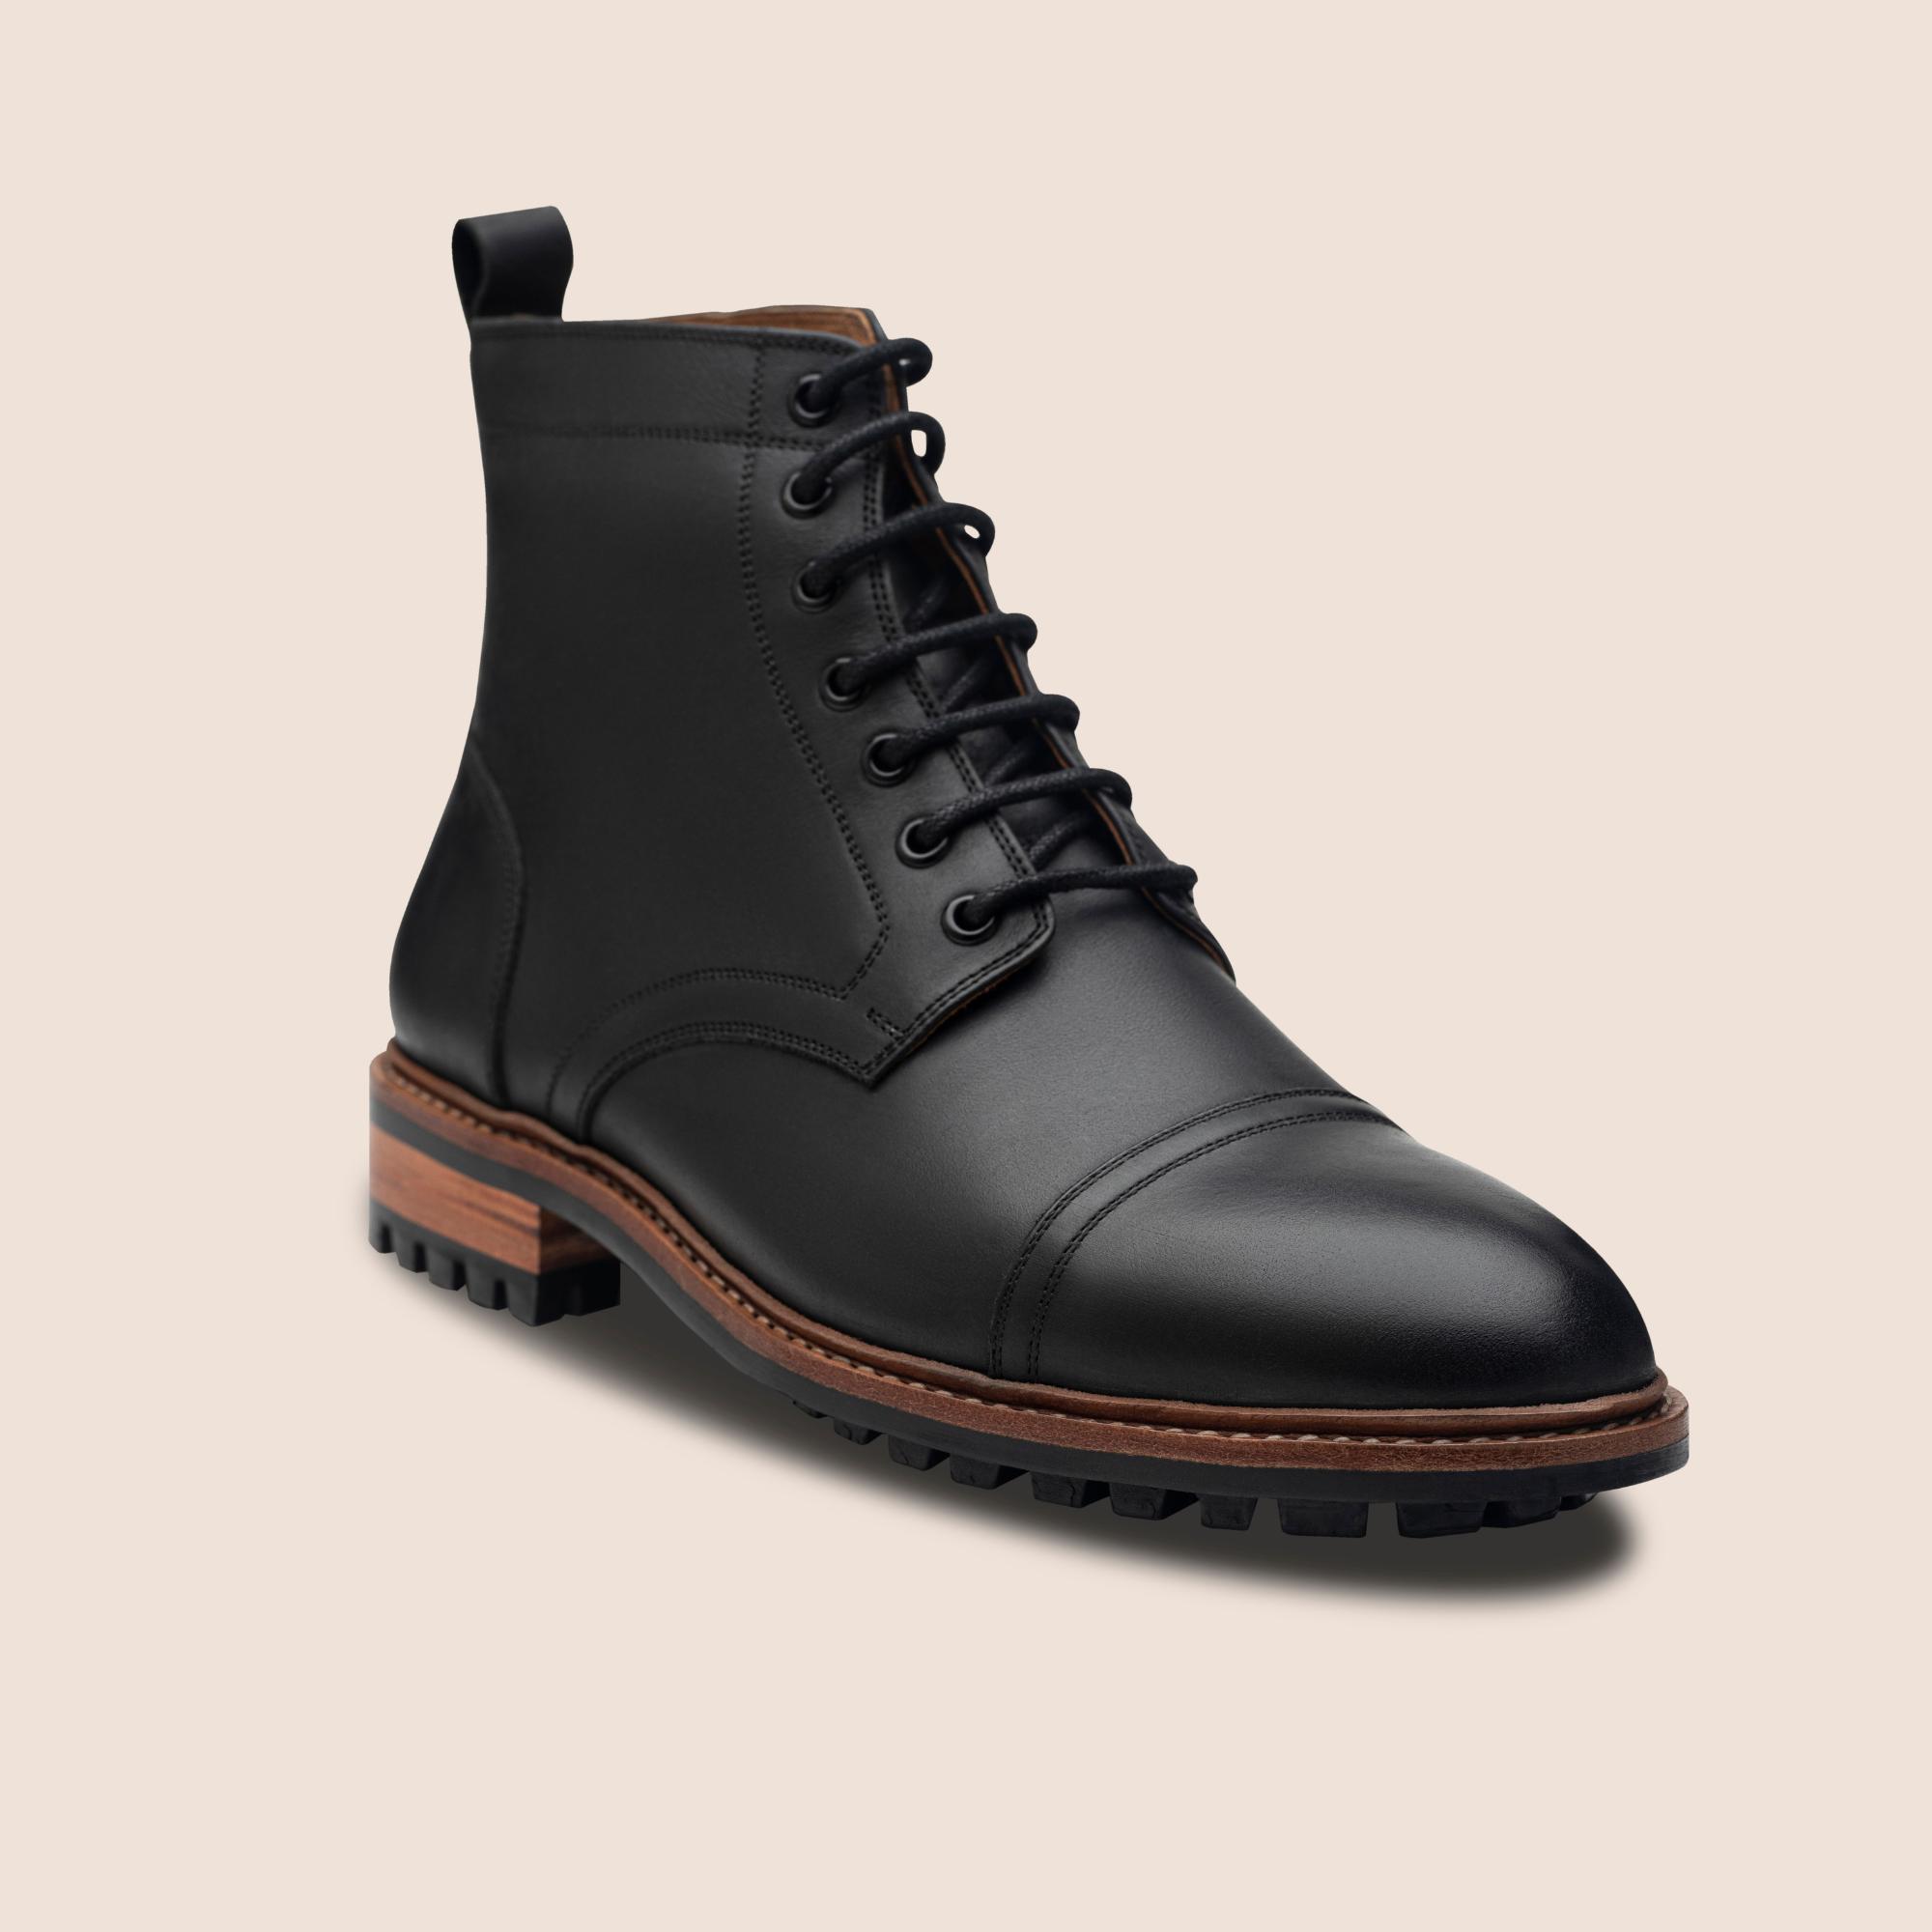 Goodyear Welted black captoe leather boots in oil pull up leather